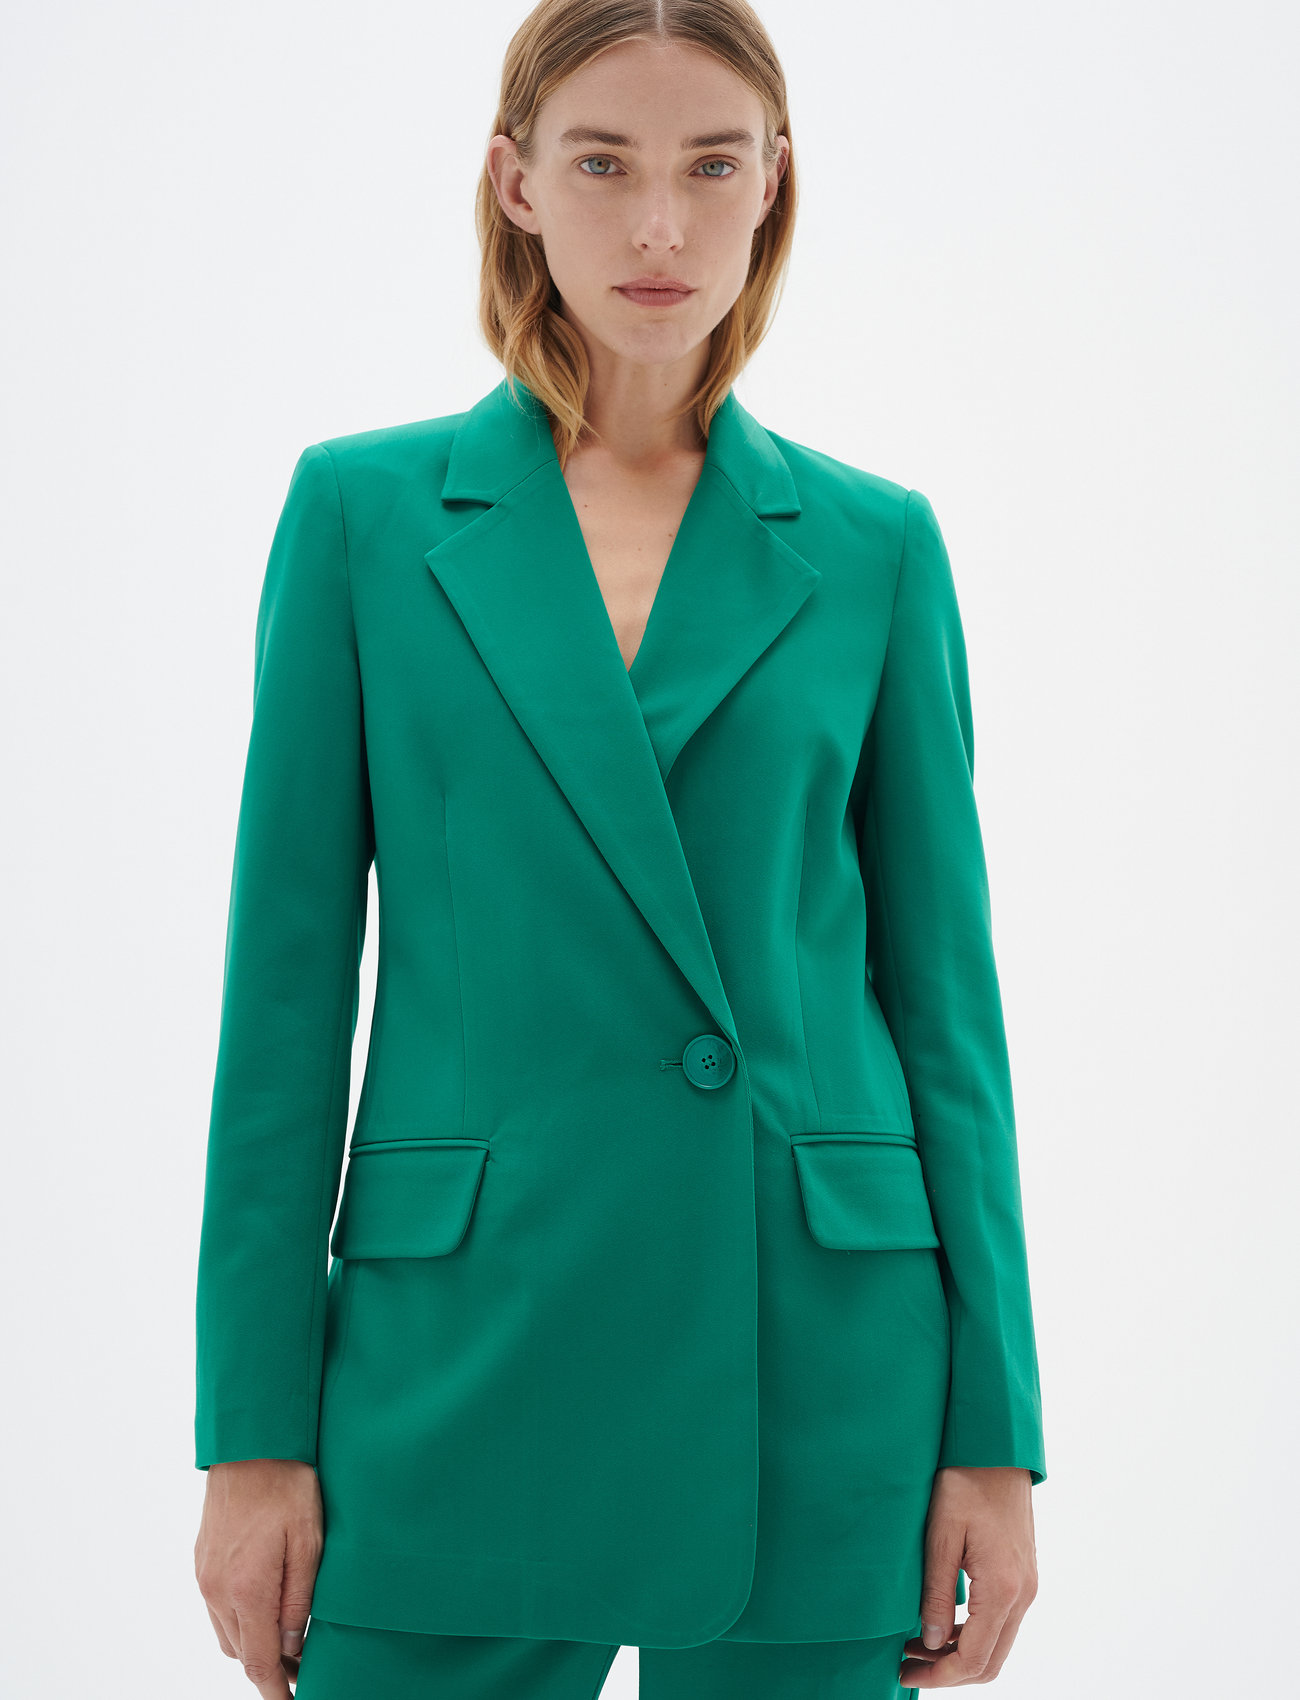 InWear - AdianIW Blazer - party wear at outlet prices - emerald green - 1